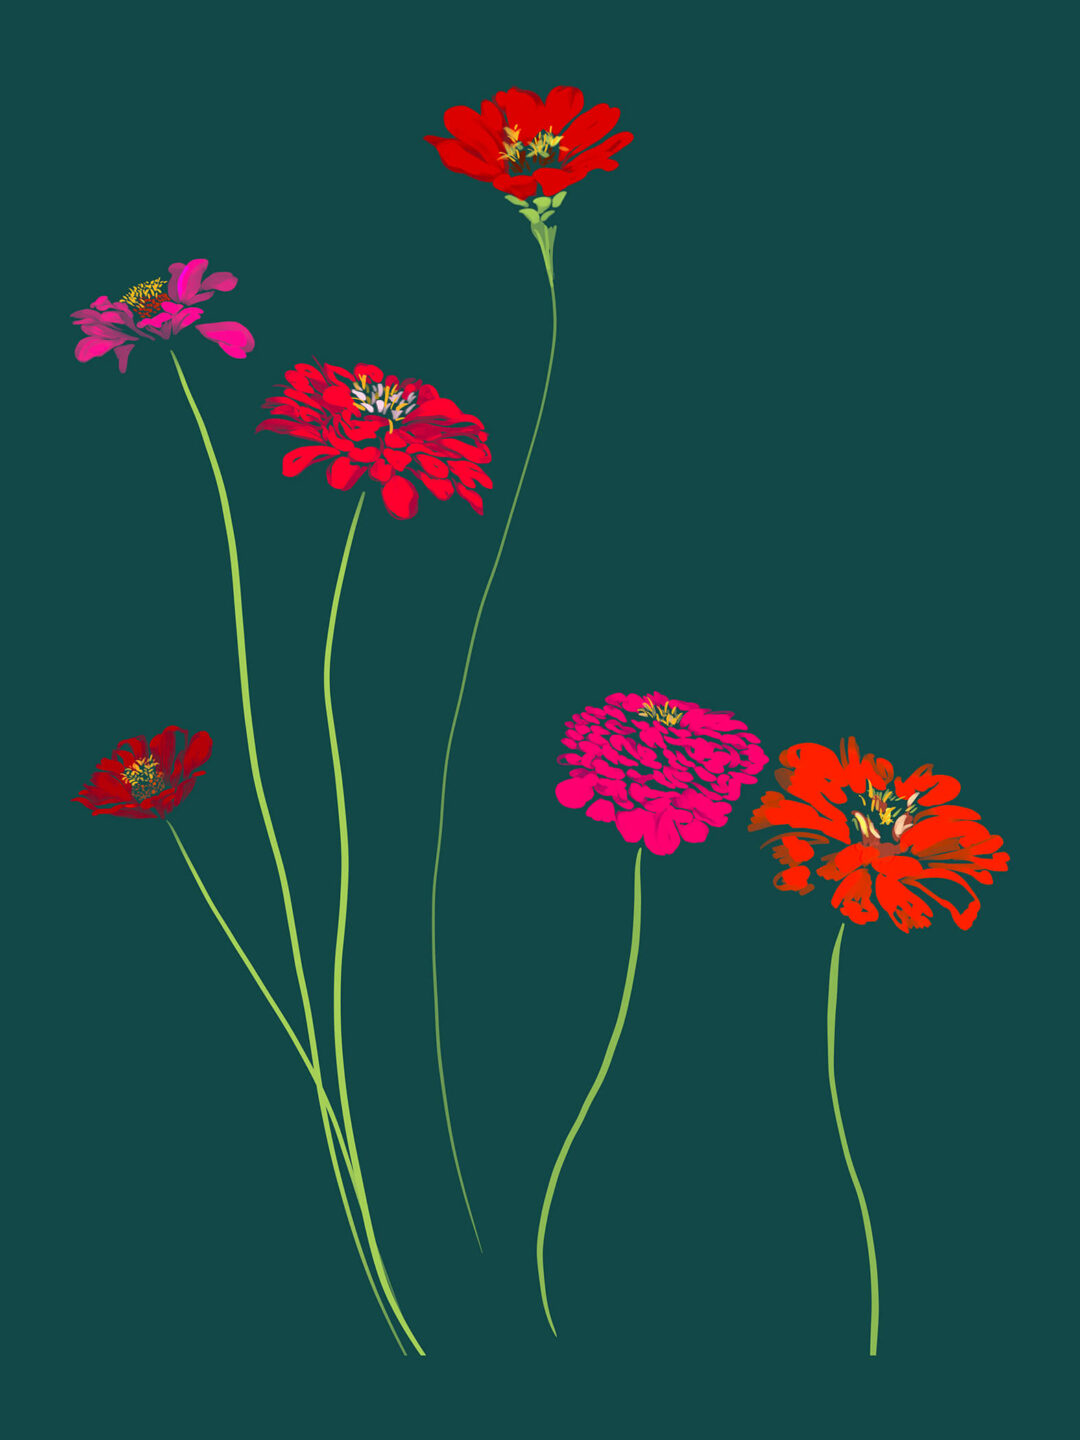 Zinnias - FLORA editions Art Prints & Cards for Flower Lovers by Catherine Toews - Giclée fine art print on archival paper